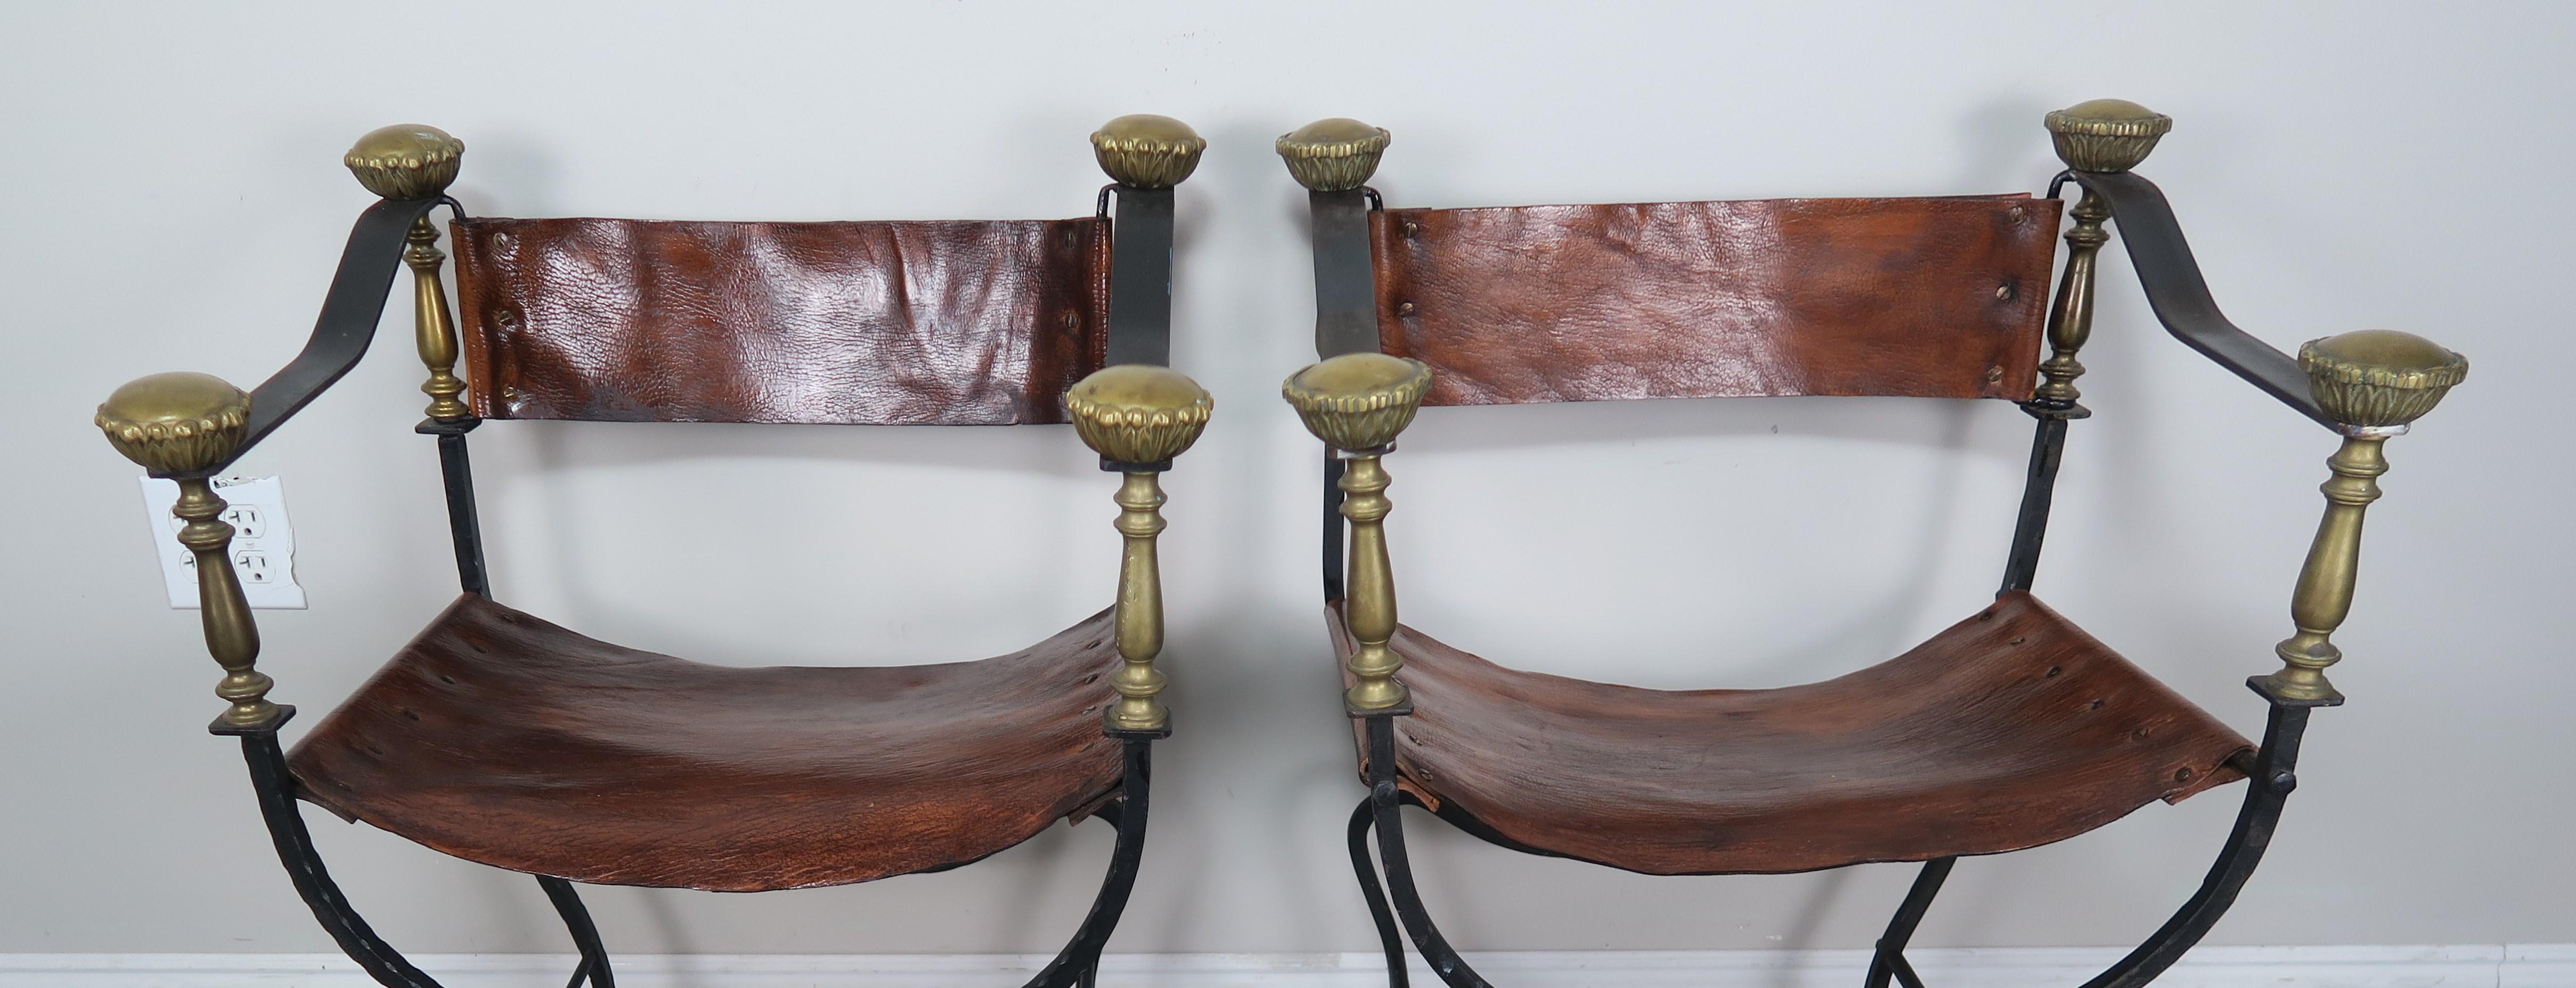 Early 20th Century Pair of Bronze Wrought Iron and Leather Chairs